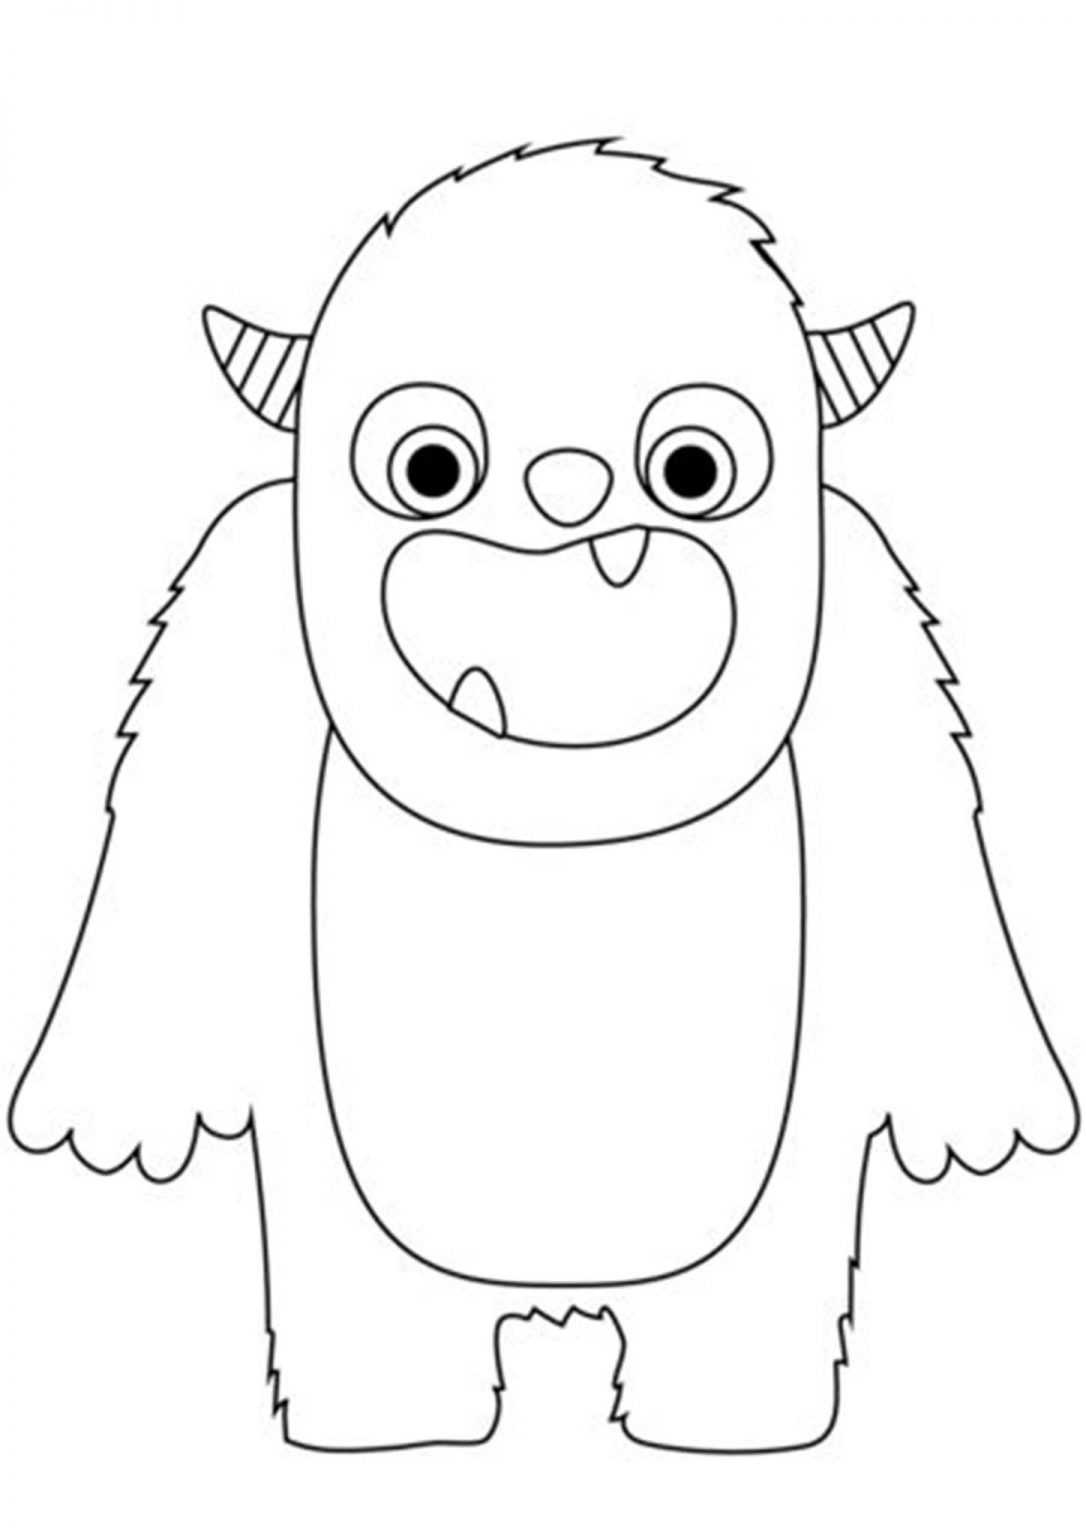 printable-cute-monster-coloring-pages